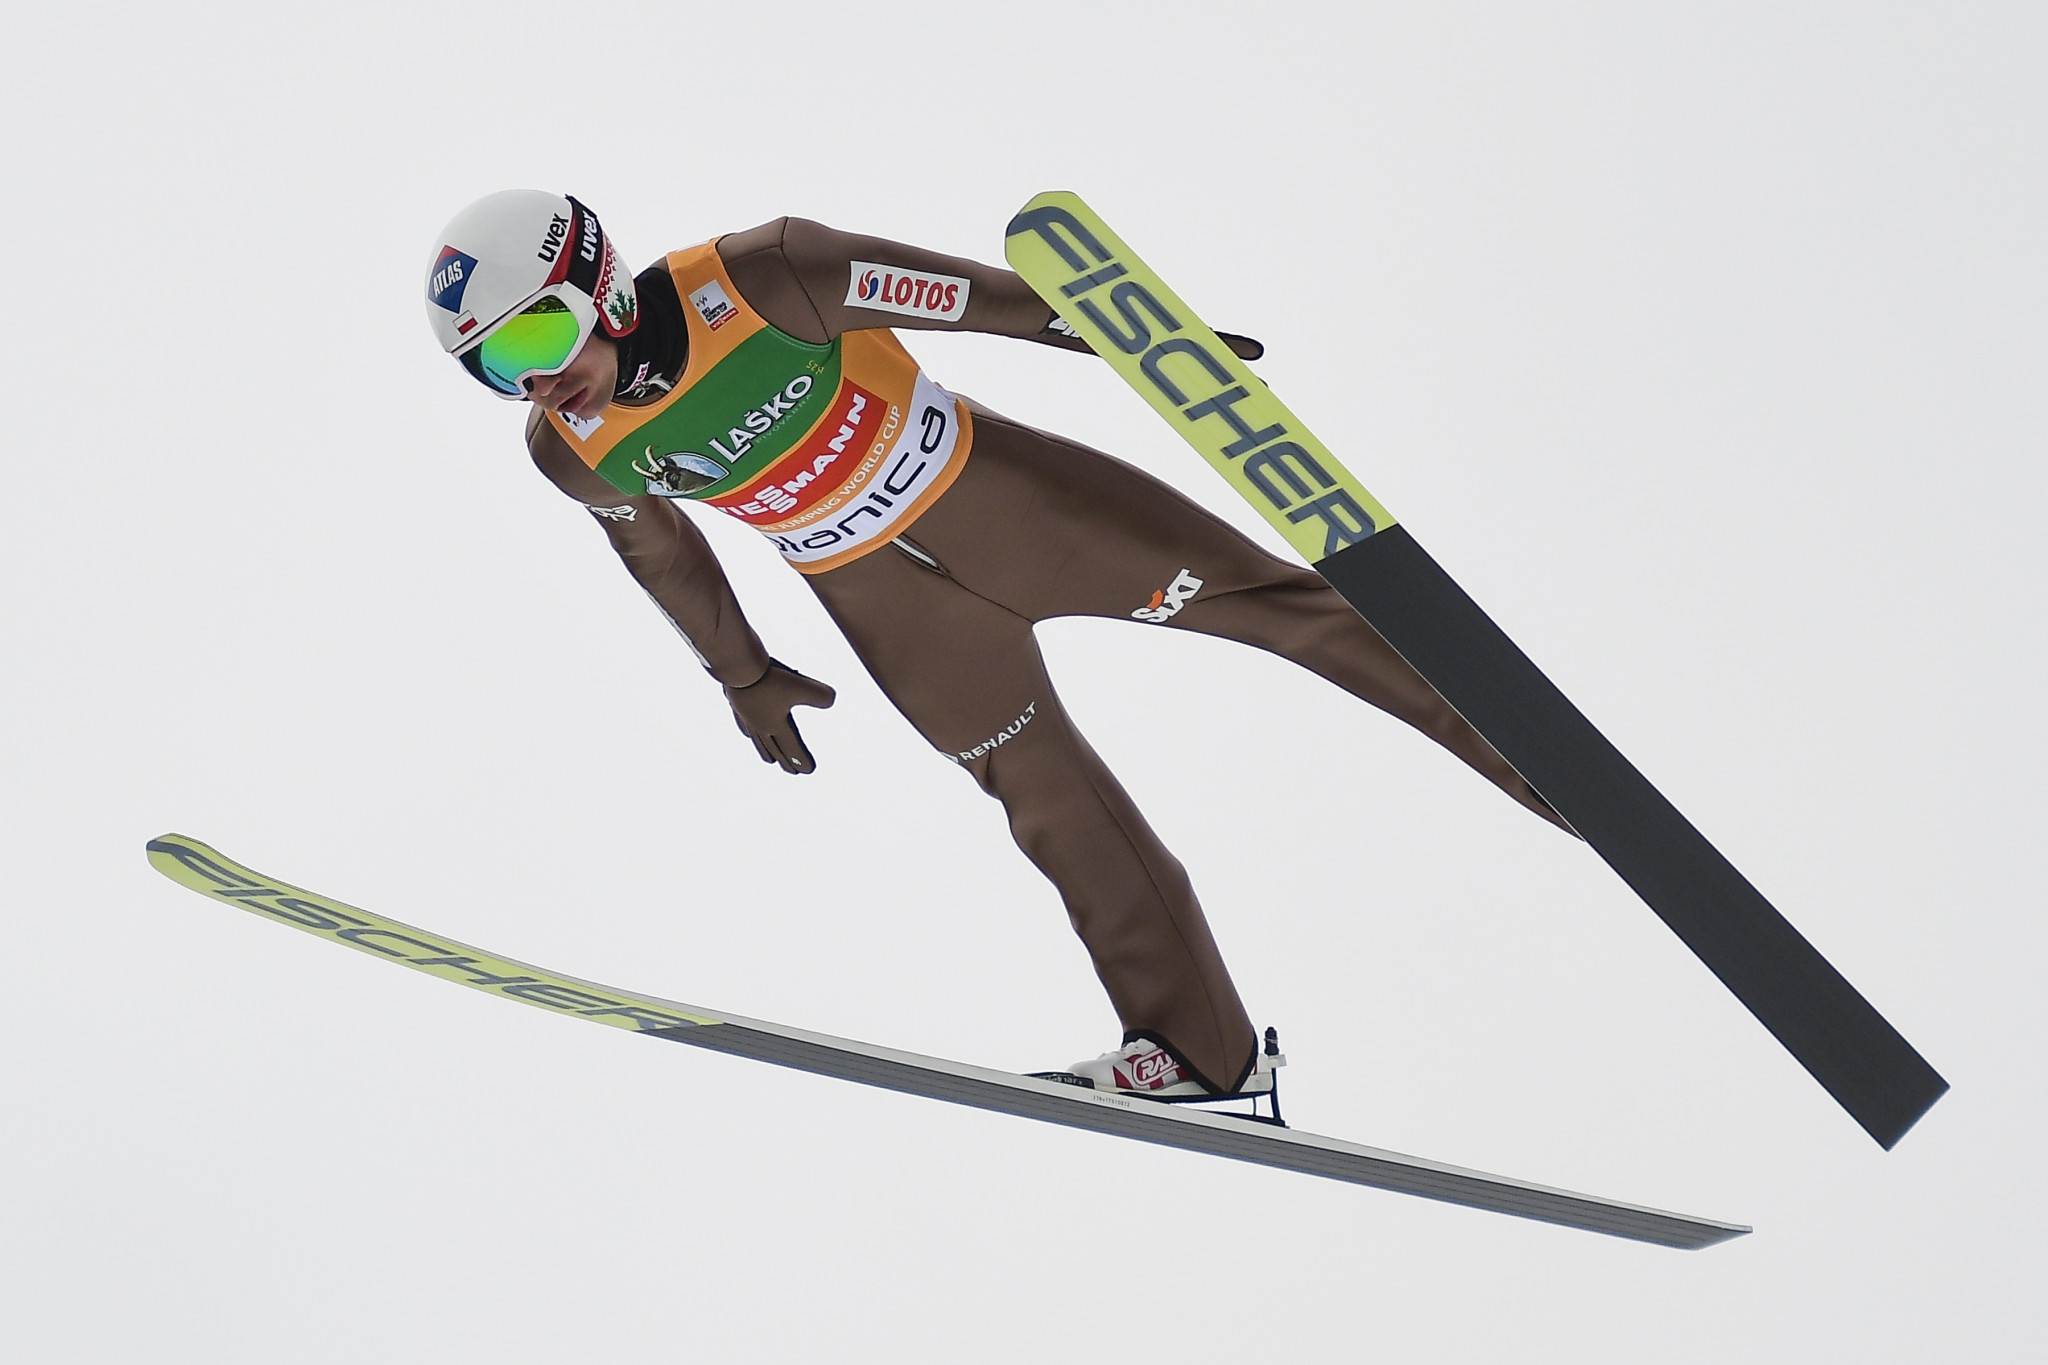 Poland win home team gold at Ski Jumping World Cup in Wisla